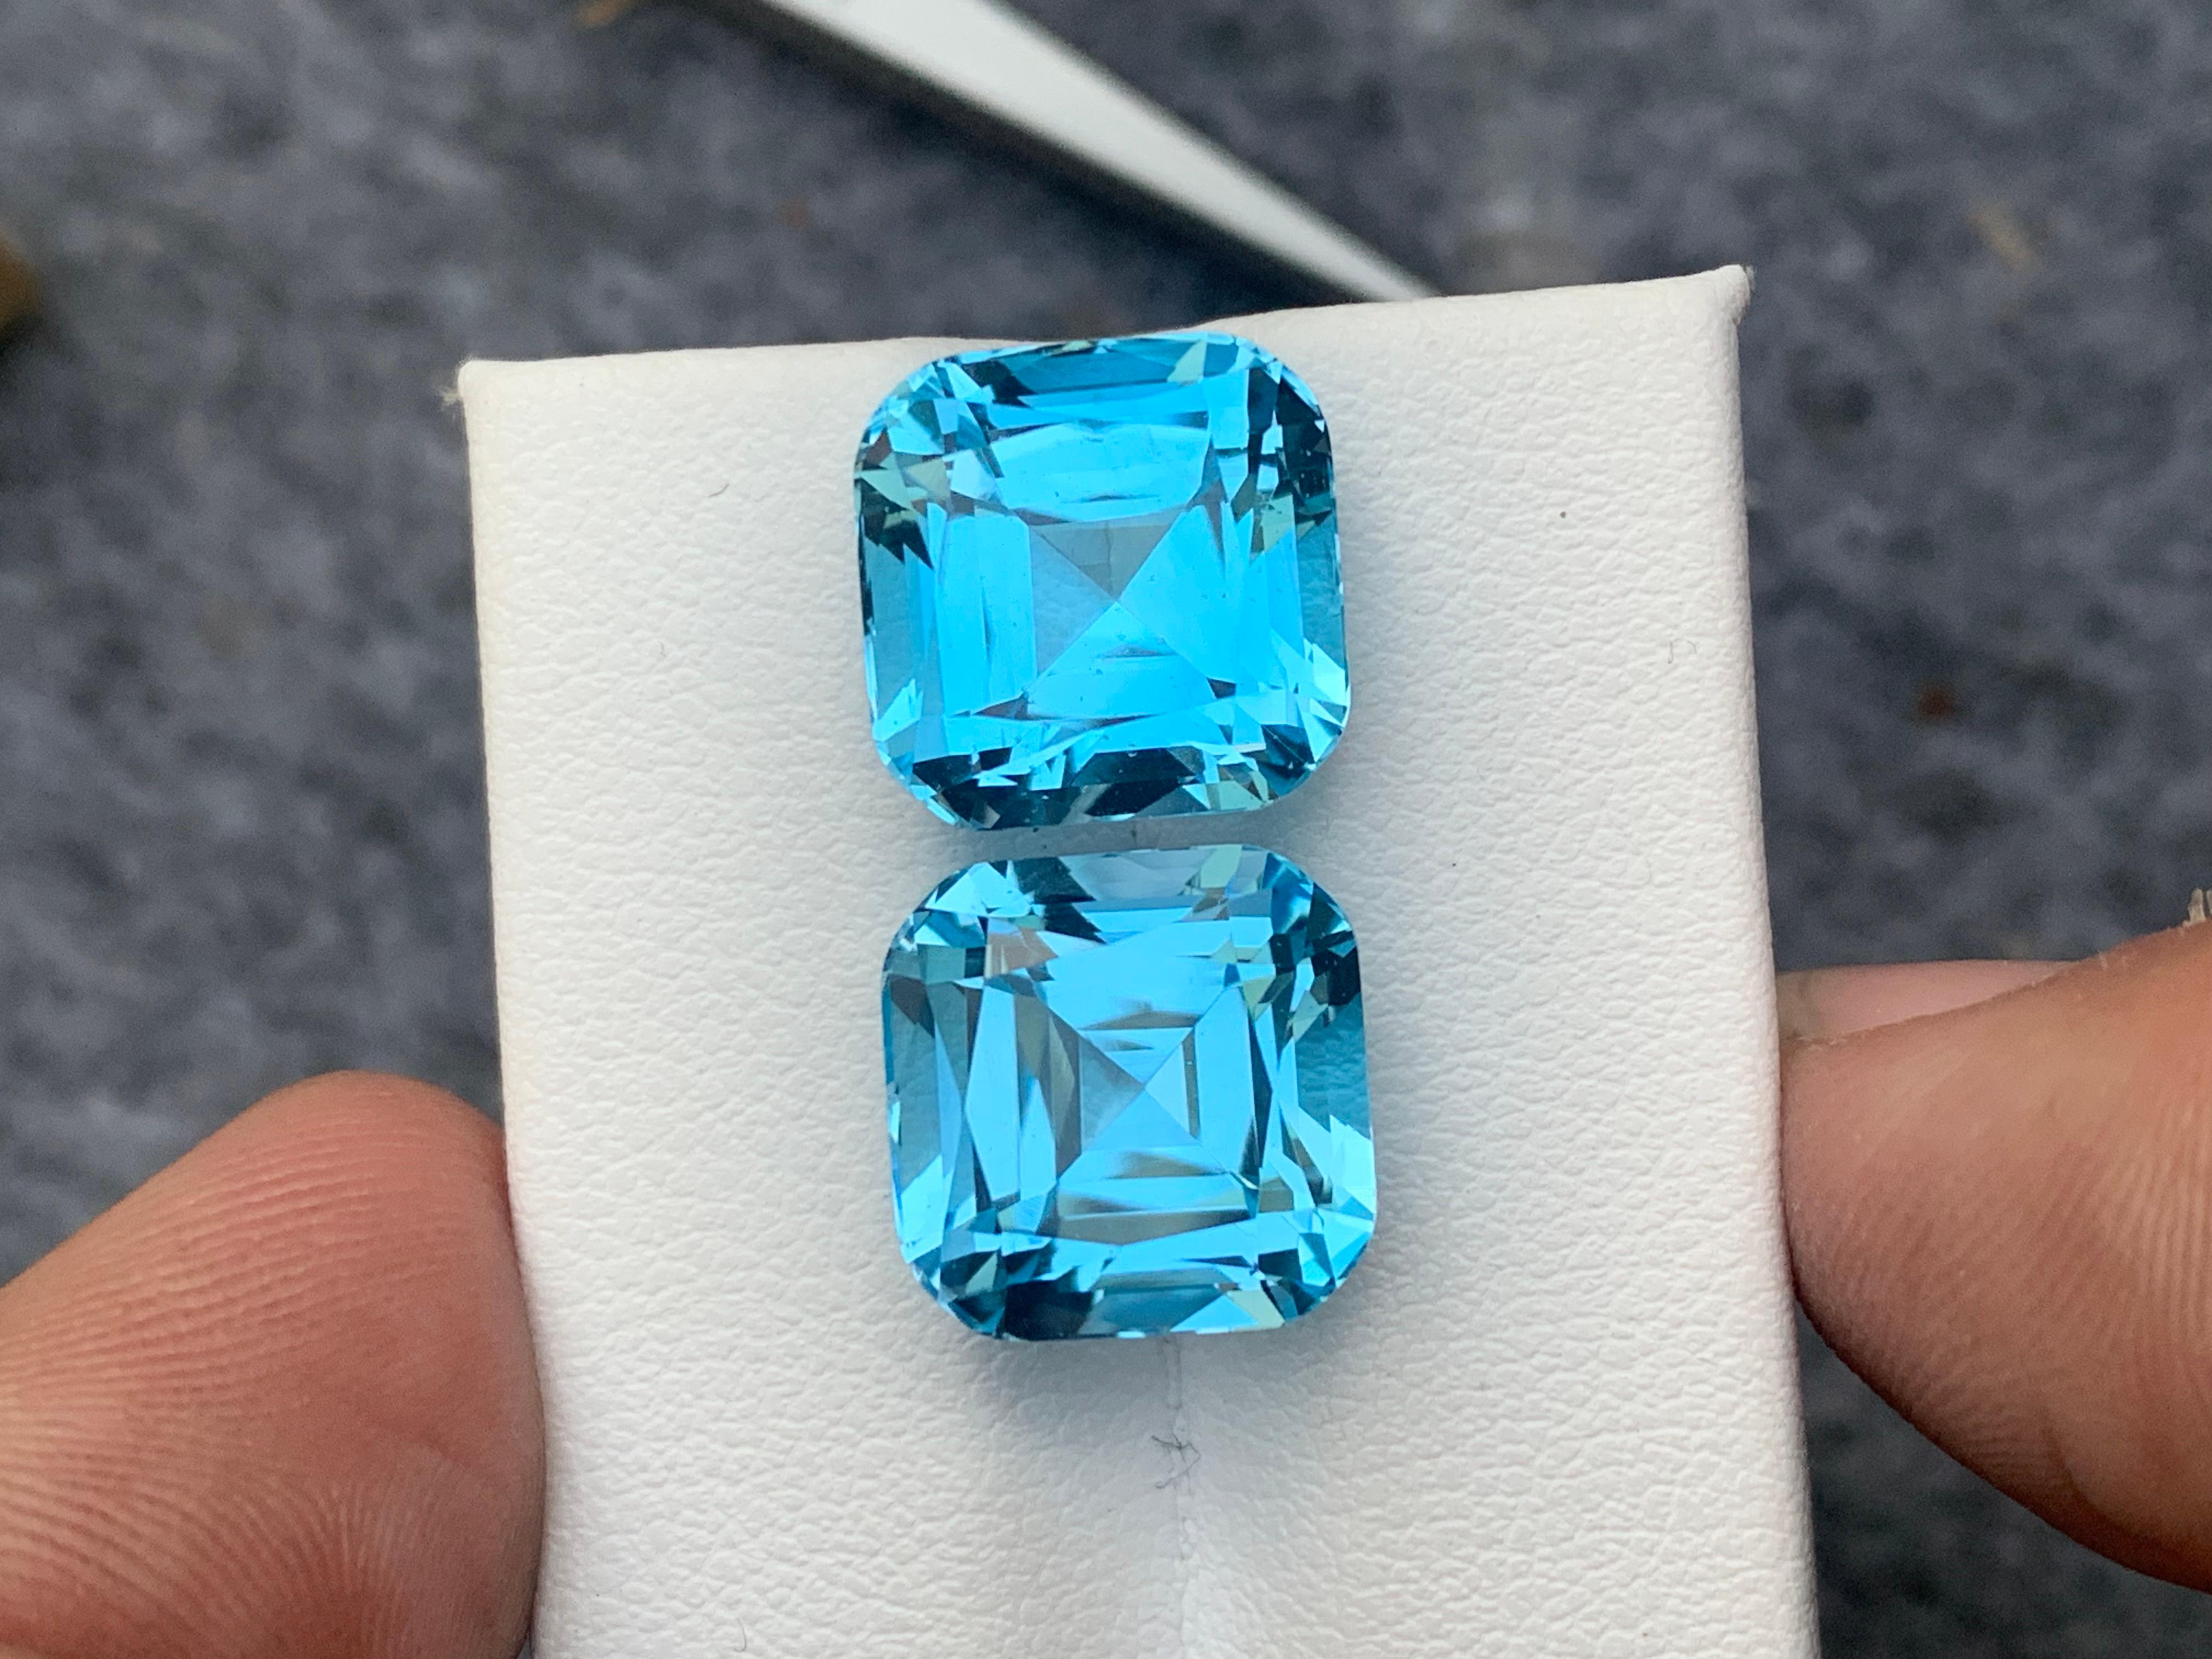 Faceted Sky Blue Topaz 
Weight : 25.40 Carats
Dimensions : 12.1x12.1x9.8 Mm
Origin : Brazil
Clarity : Eye Clean
Shape: Cushion
Color: Blue
Certificate: On Demand
.
Blue Topaz Metaphysical Properties
Blue topaz, in particular, is believed to promote